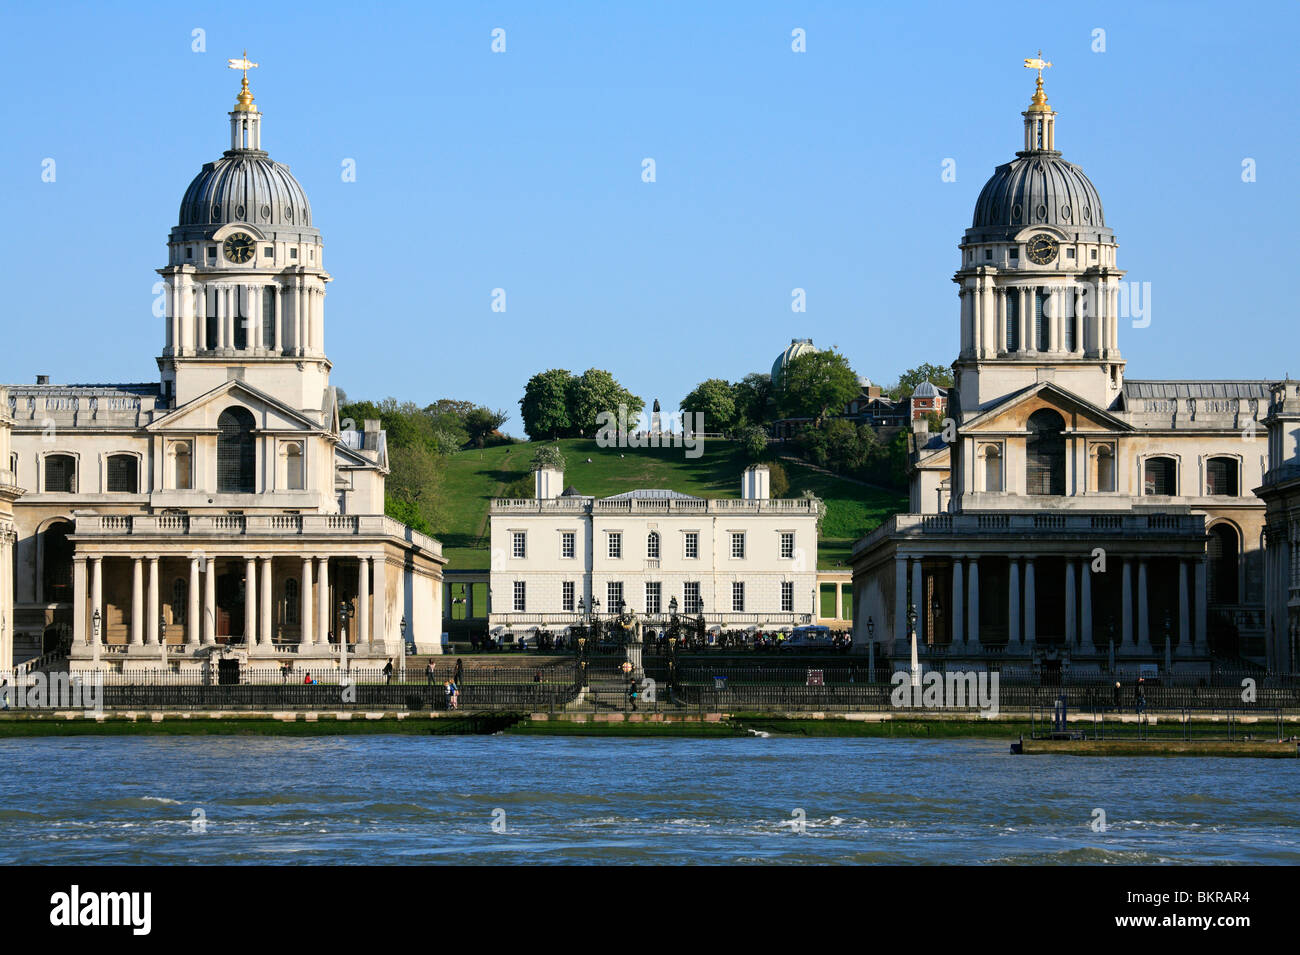 Greenwich Royal Naval College, London, from across the River Thames, Royal Observatory, Greenwich Park, Queens House in centre Stock Photo